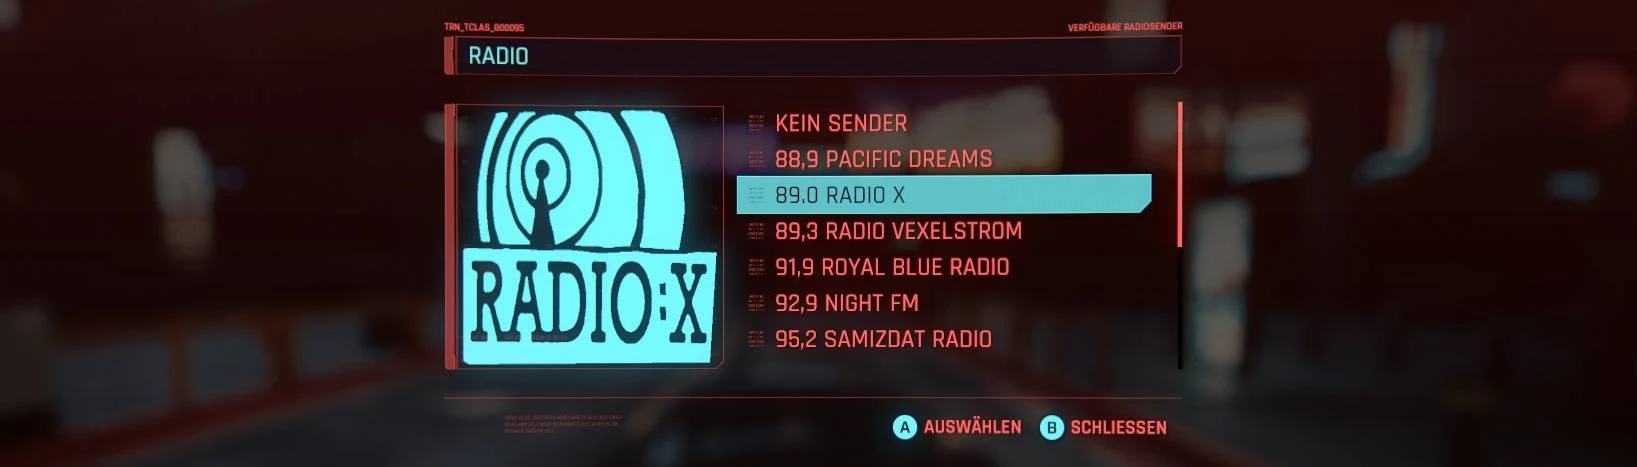 Steam Community :: Guide :: Cyberpunk 2077 Radio Stations with 2.0 Update